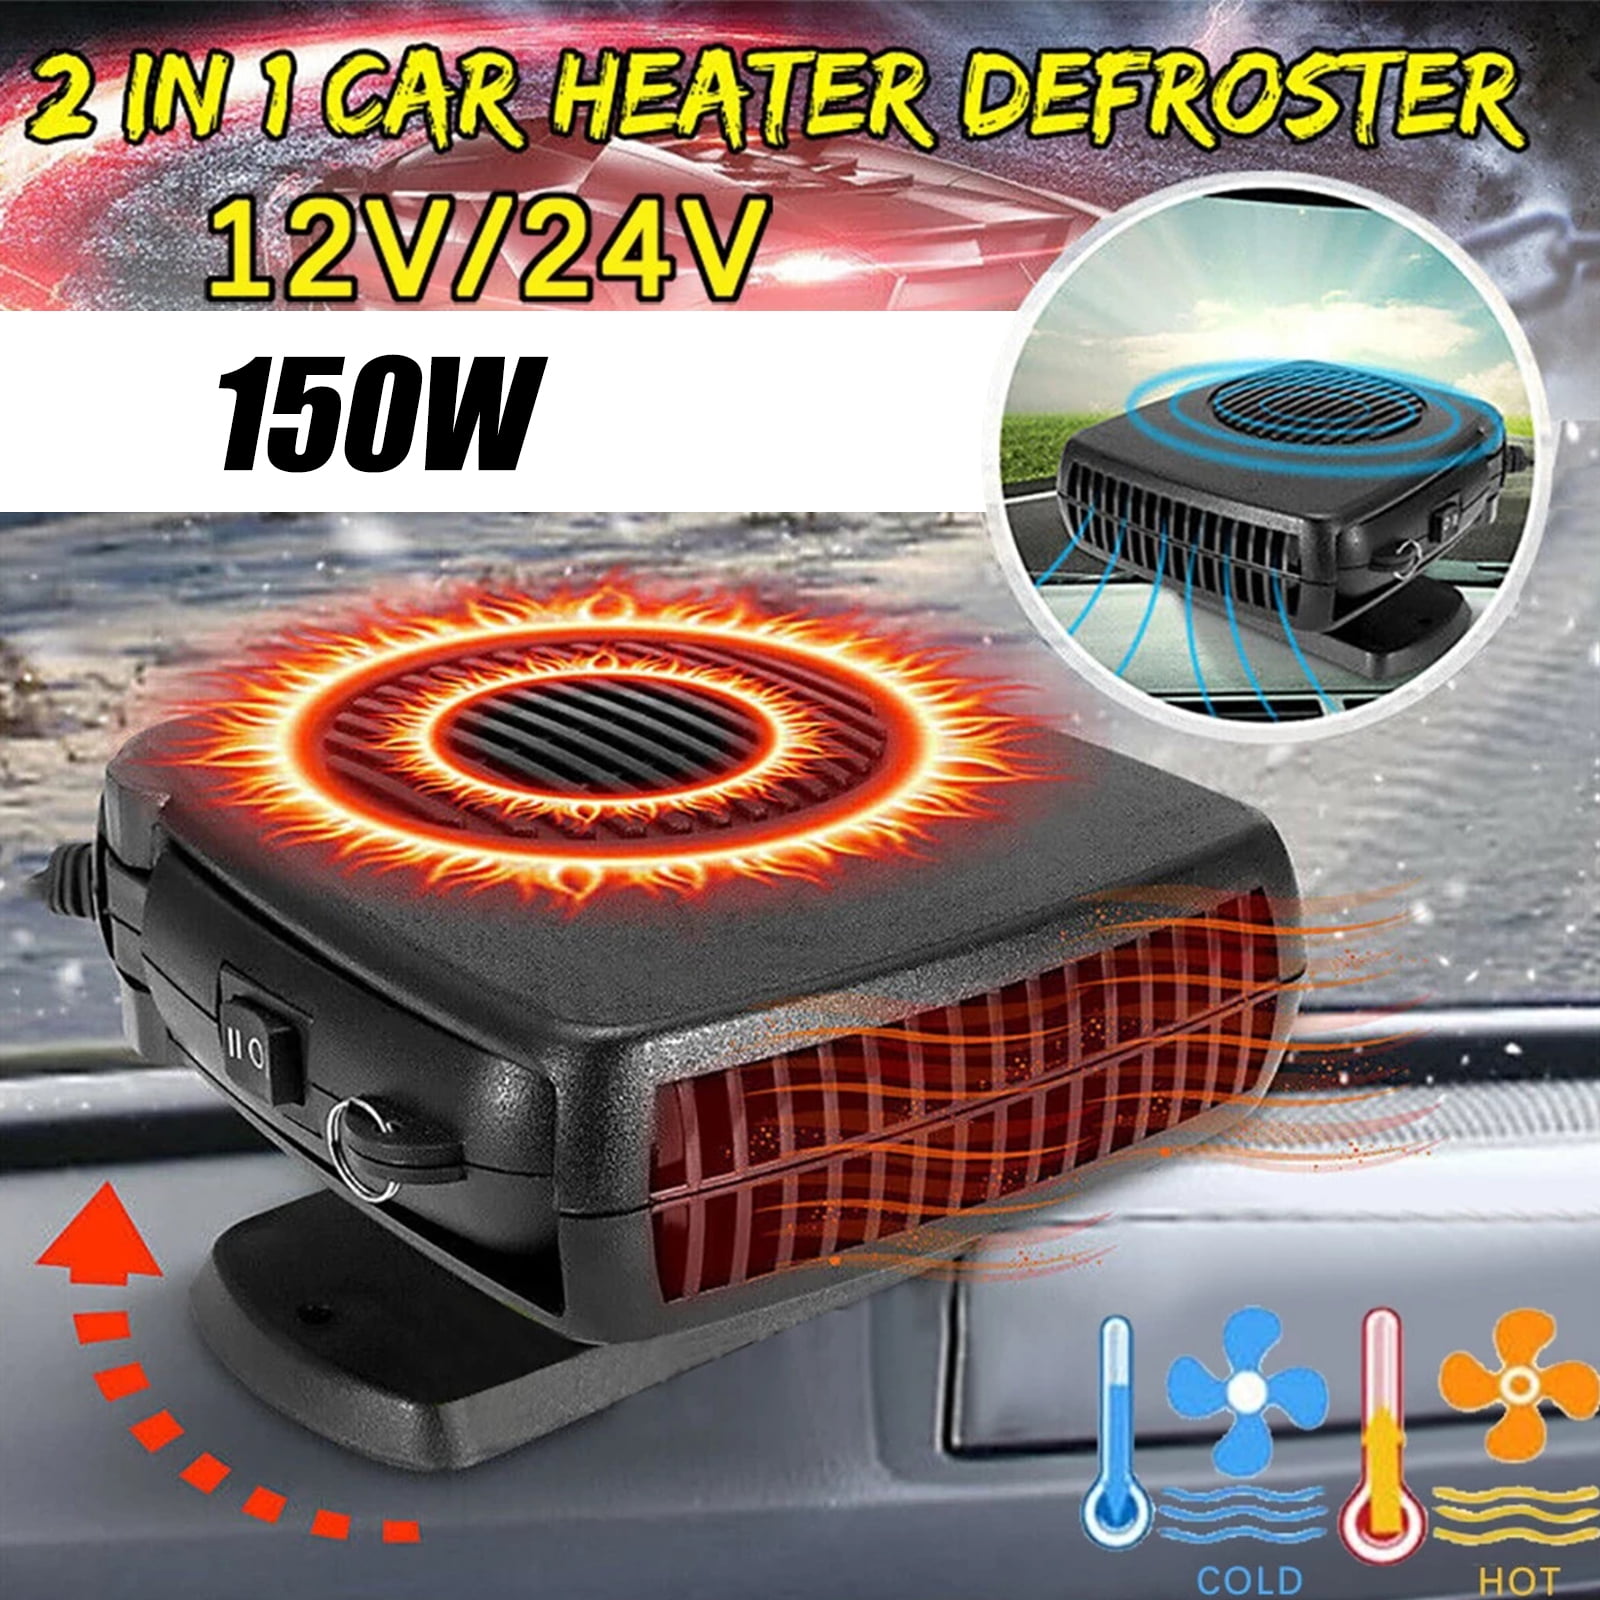 Portable Car Defroster Heater Low Noise 12V 150W Fast Heating Quickly Defrost Defogger Demister Car Winter Windscreen Window Heater Cooling Fan with 360 Degree Rotating Base 